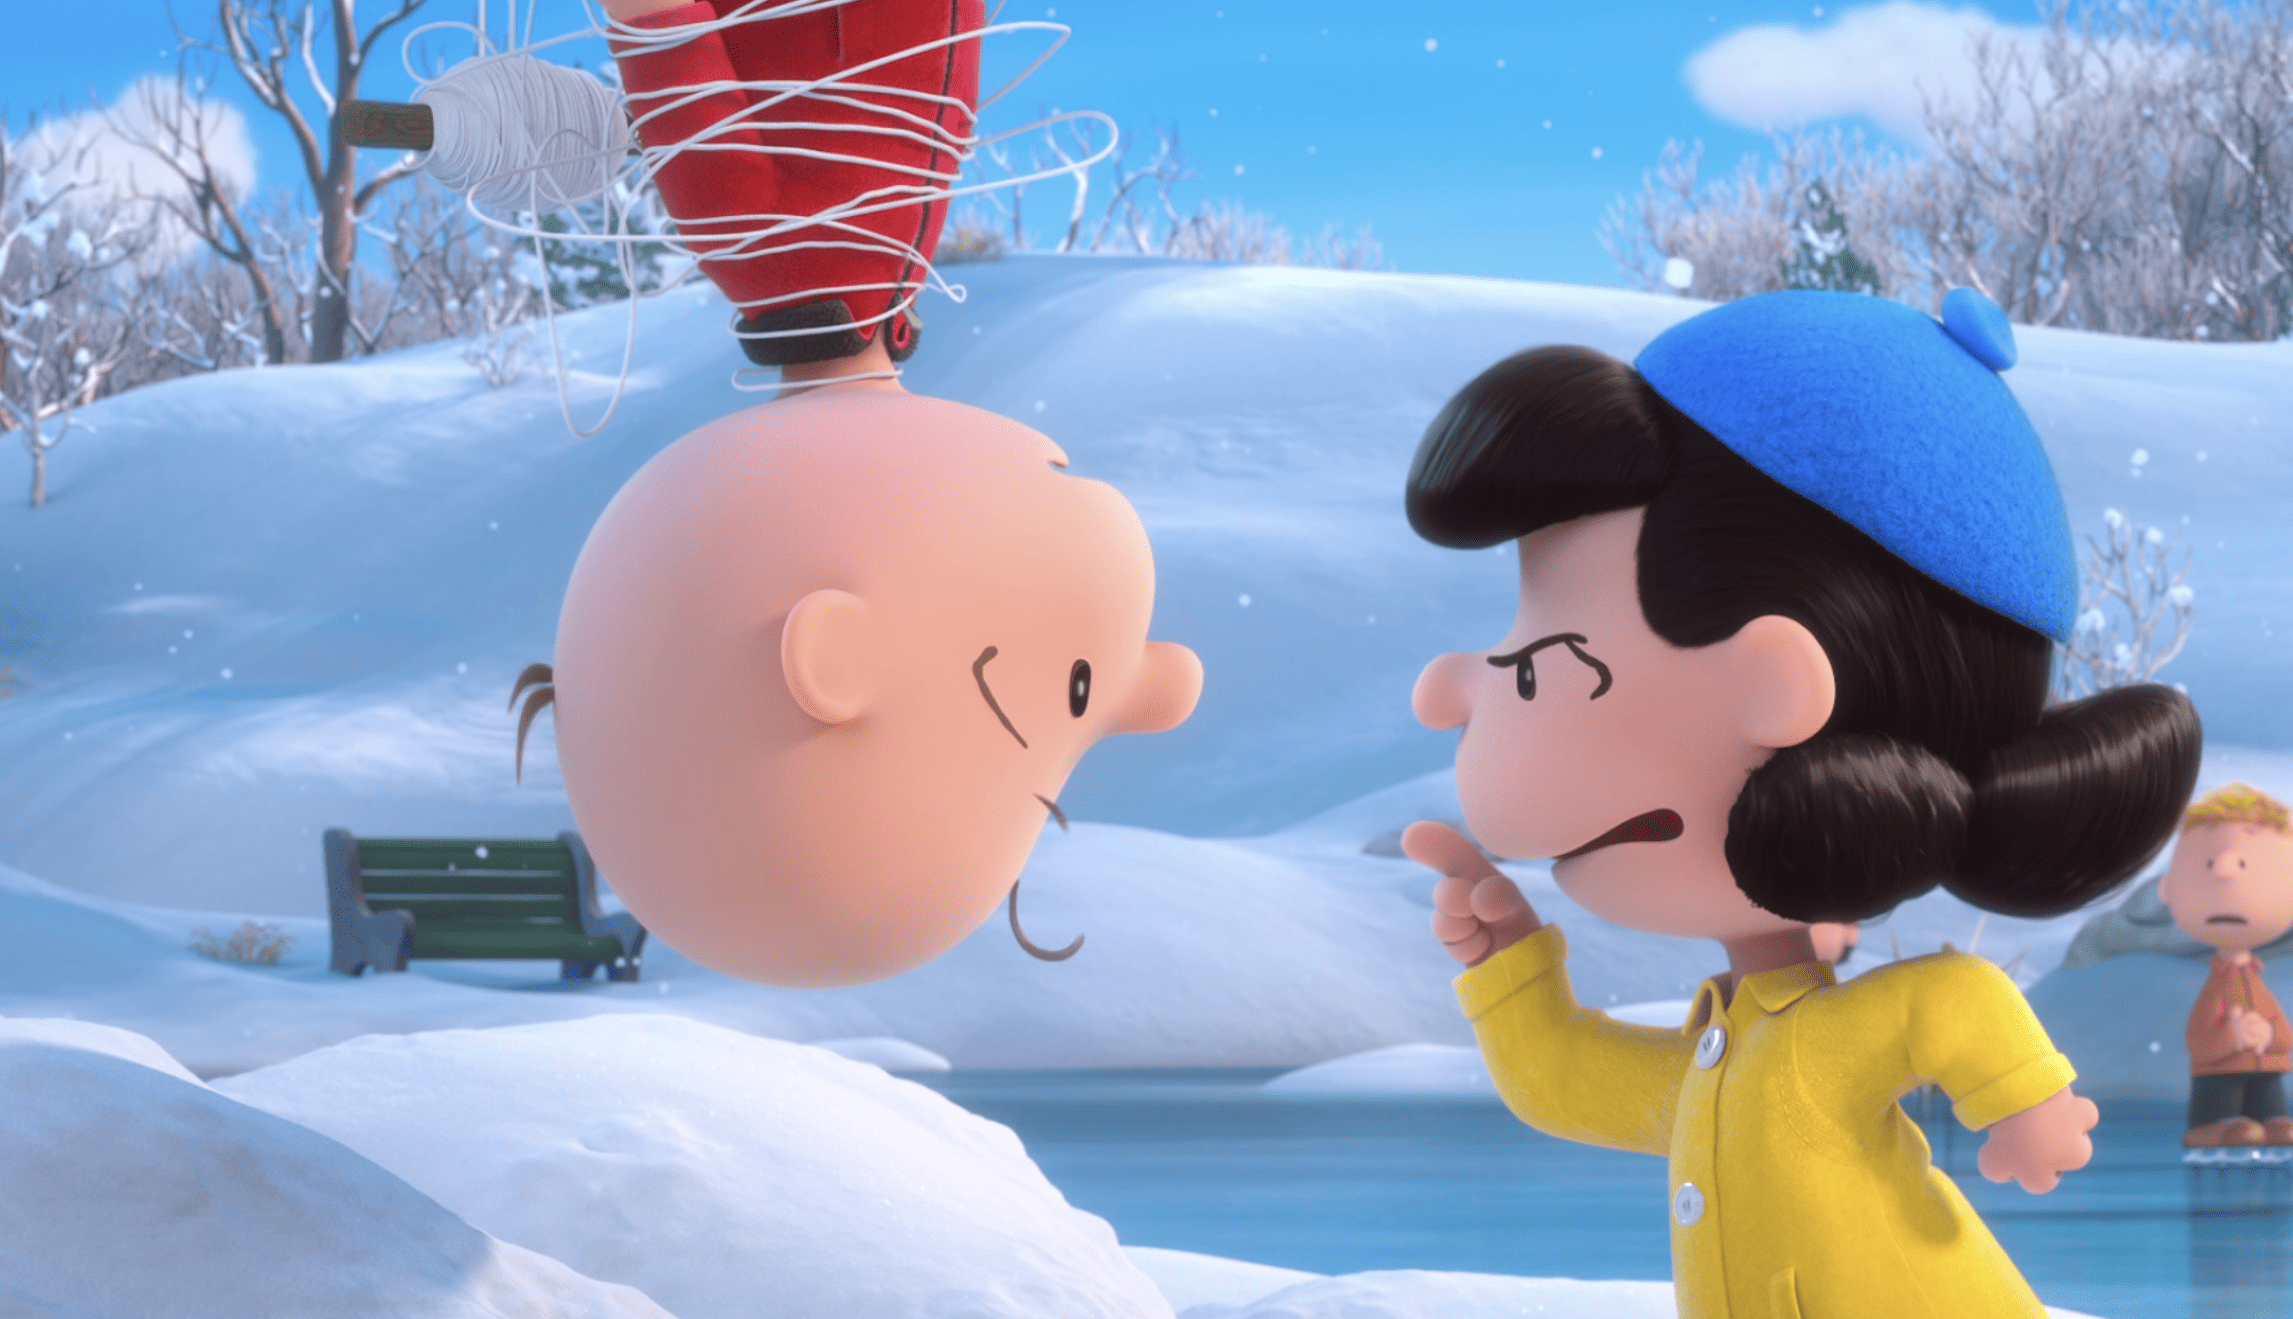 An animated boy hanging upside down and tied with kite string is scolded by an animated girl skating on a frozen lake in this image from Twentieth Century Fox Animation.